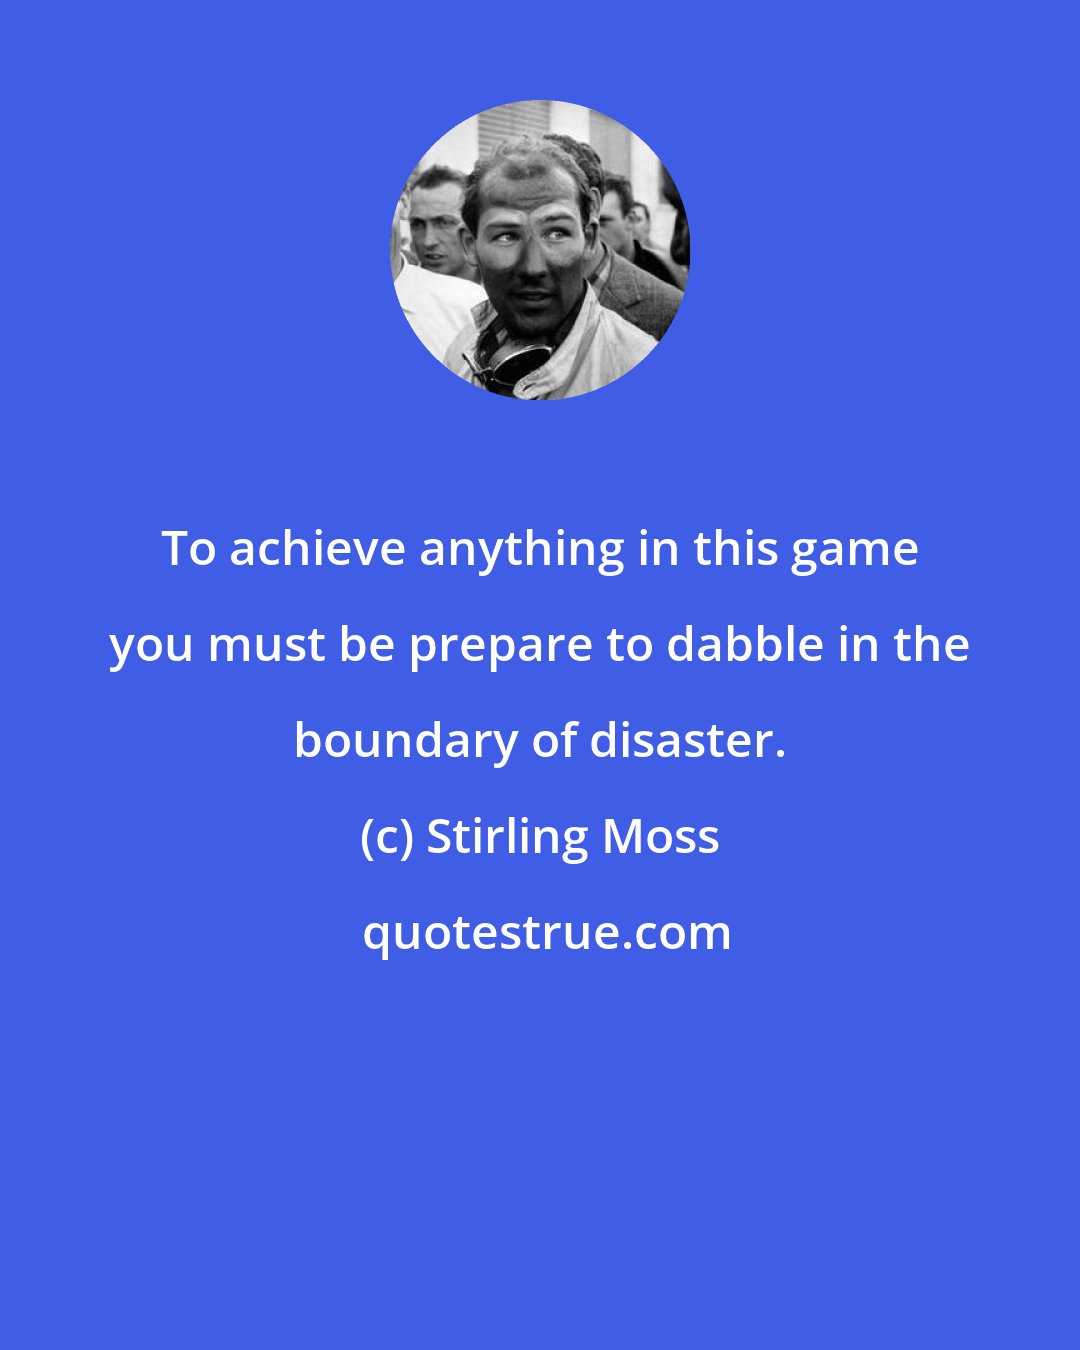 Stirling Moss: To achieve anything in this game you must be prepare to dabble in the boundary of disaster.